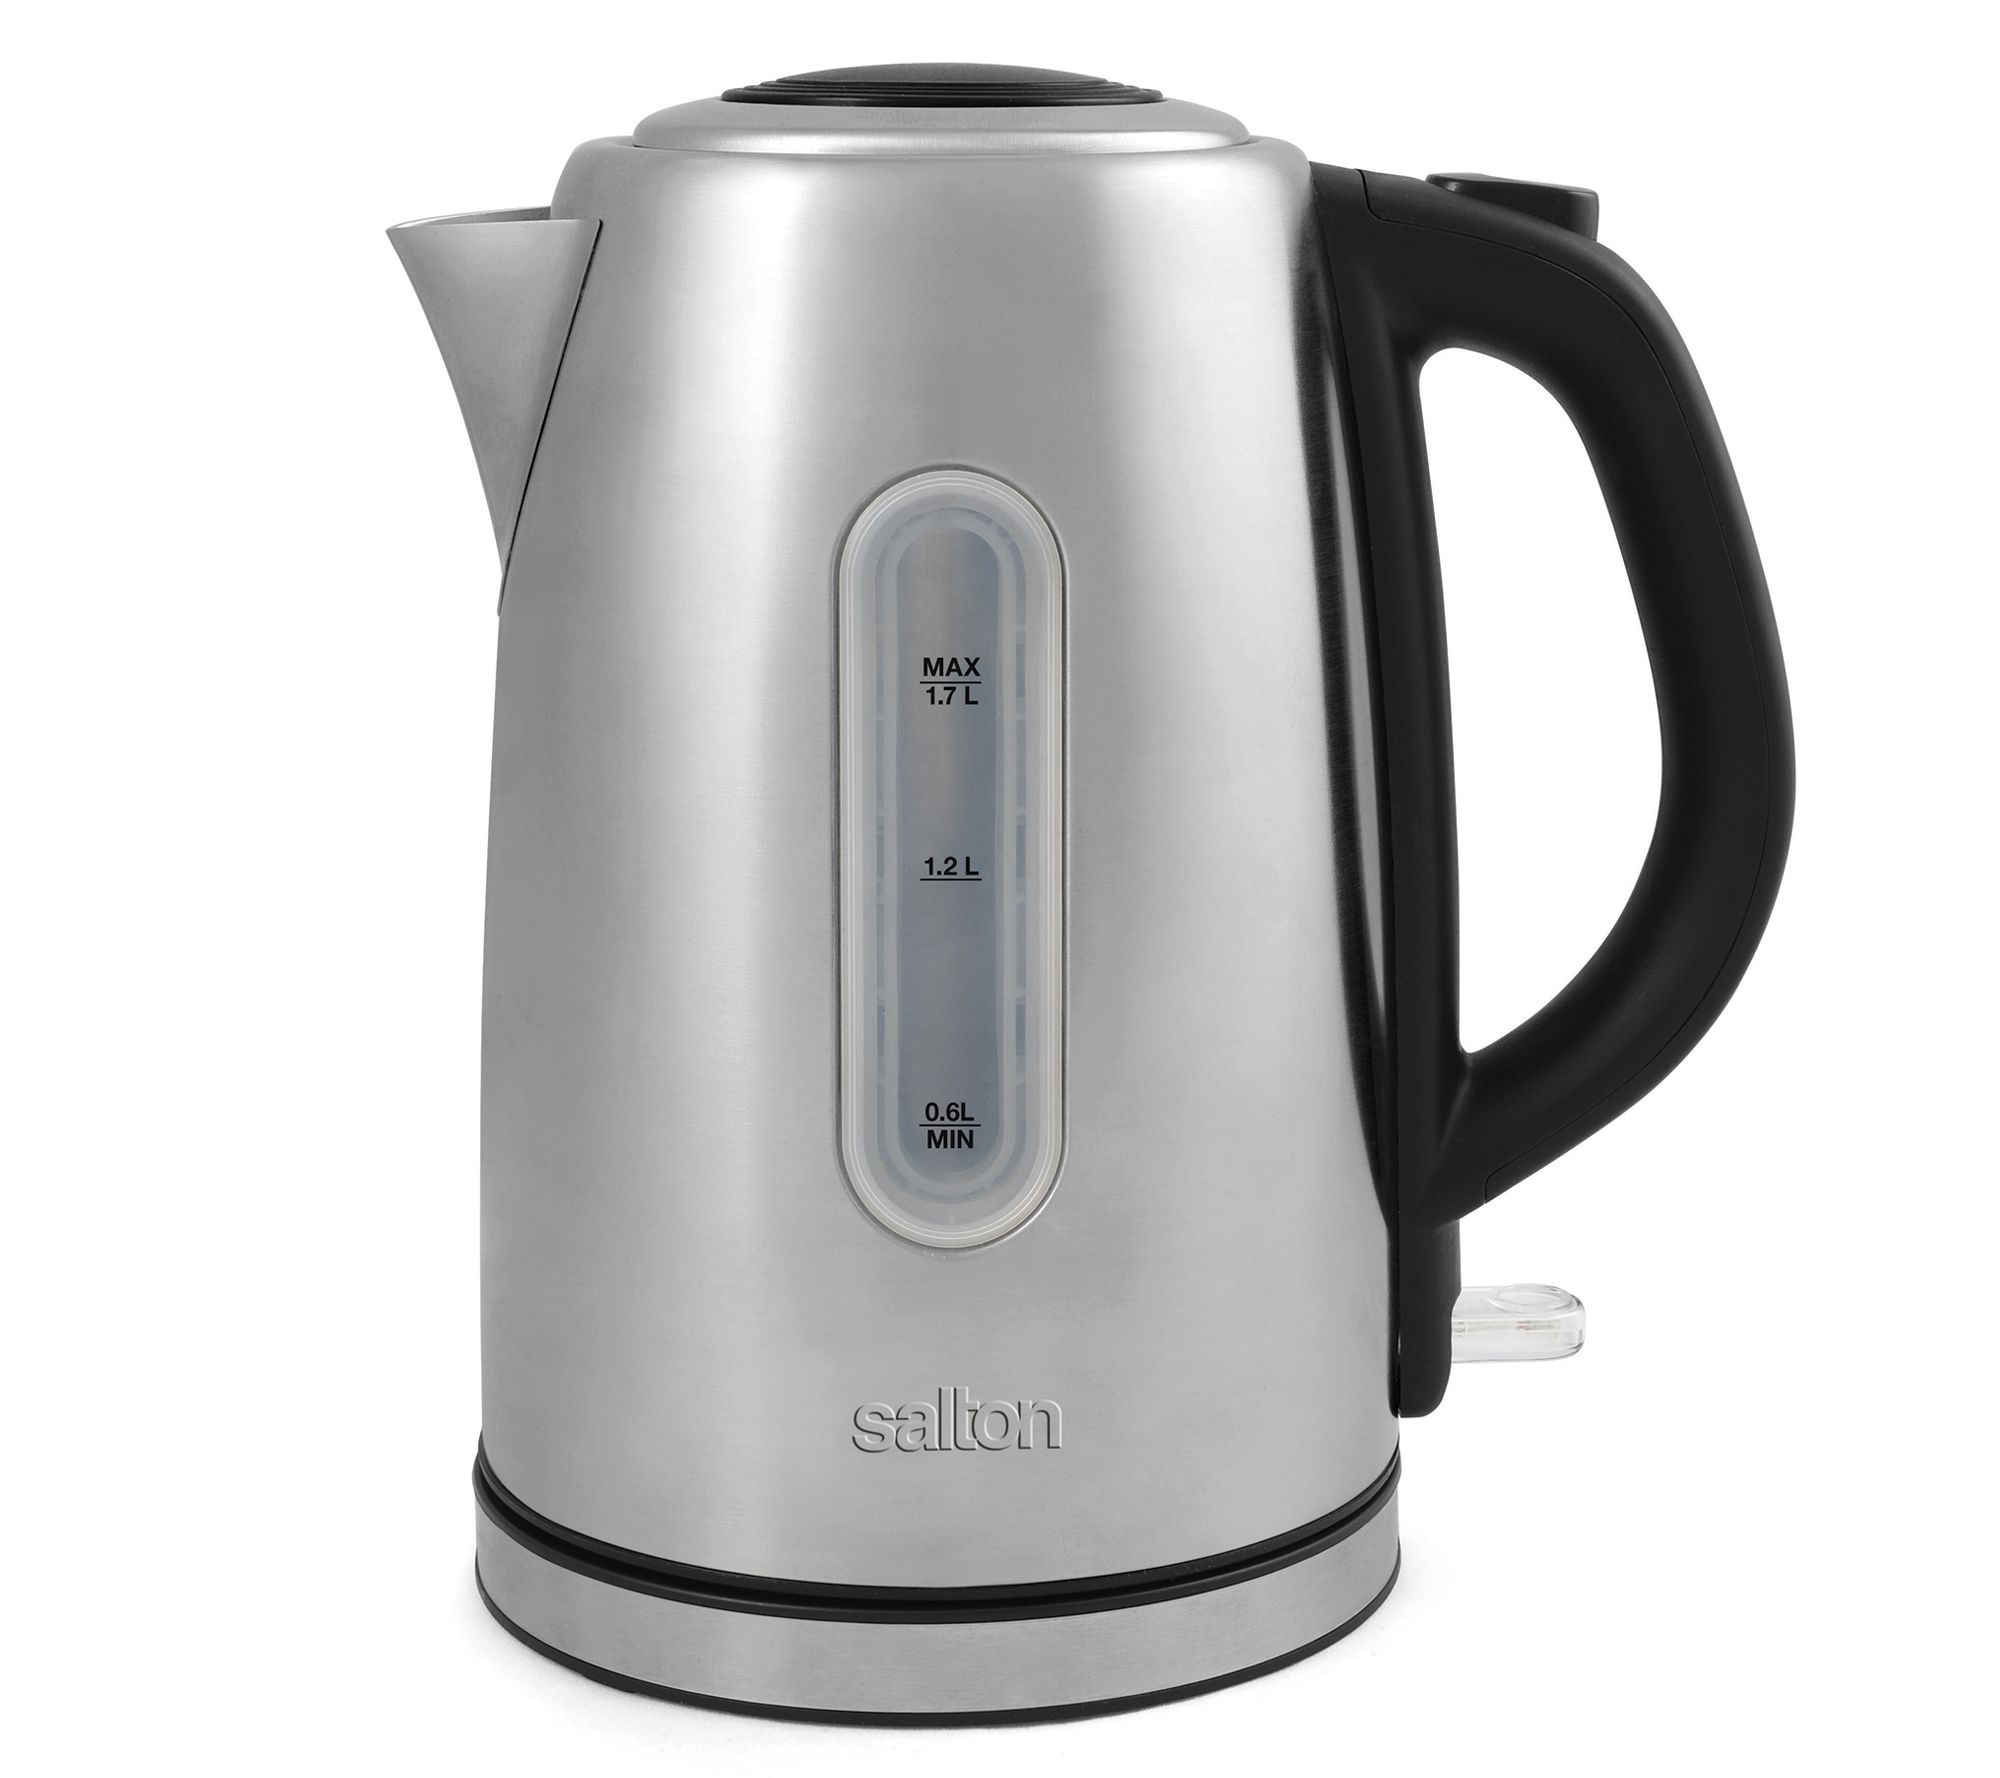 Cordless Electric Glass Kettle I Chef'sChoice Model 680 - Chef's